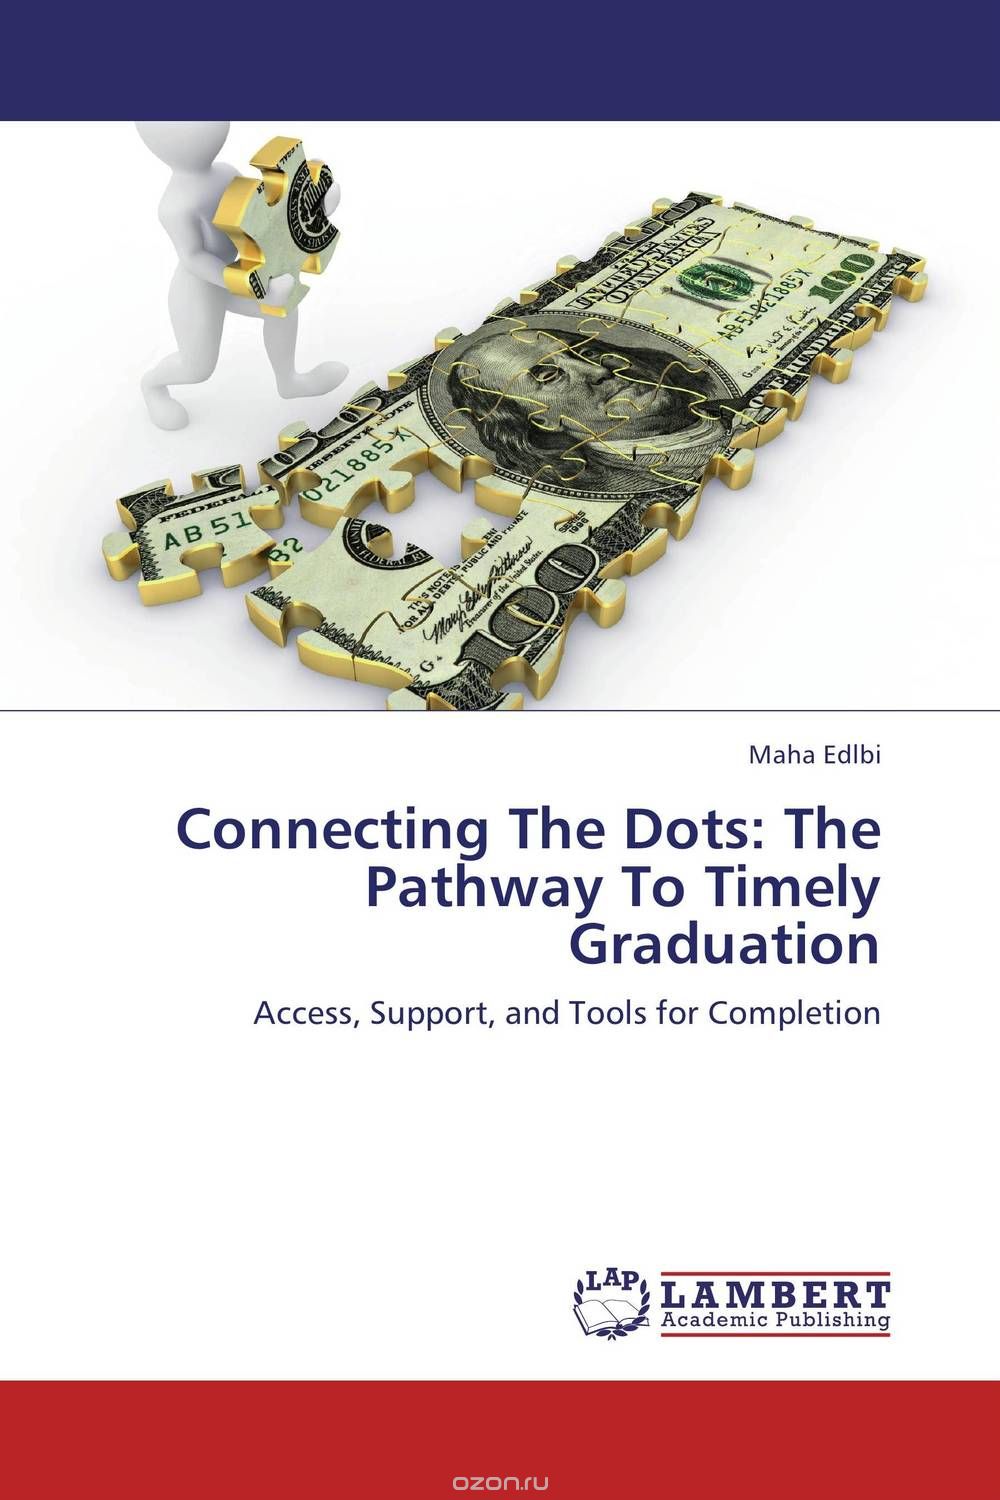 Connecting The Dots: The Pathway To Timely Graduation